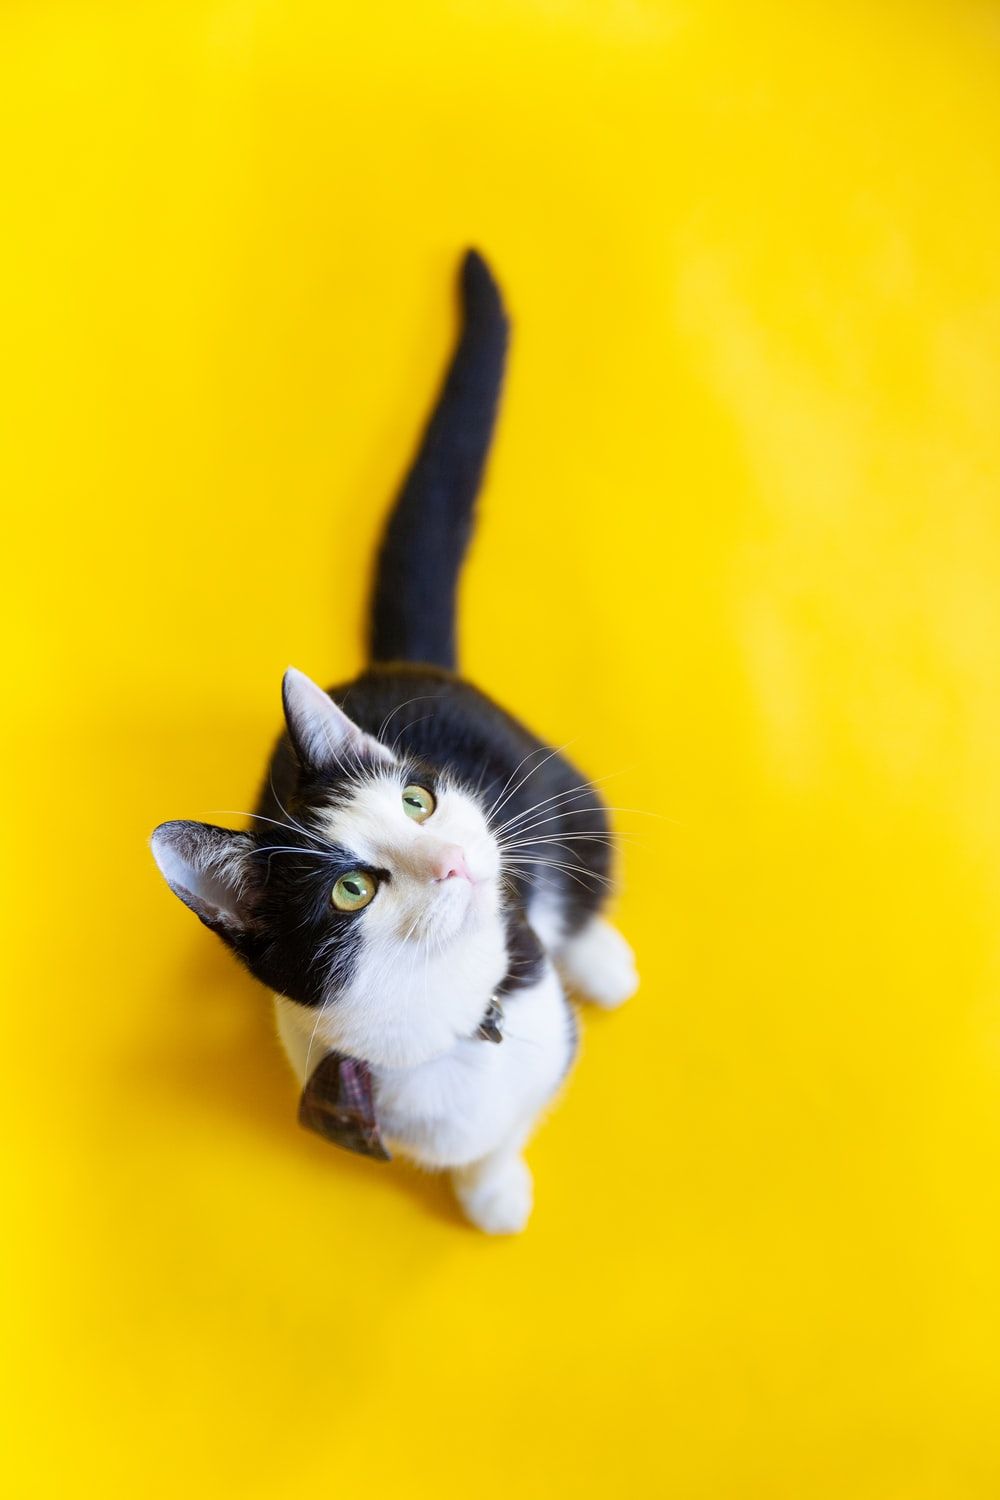 Black and white cat on a yellow background - Cat